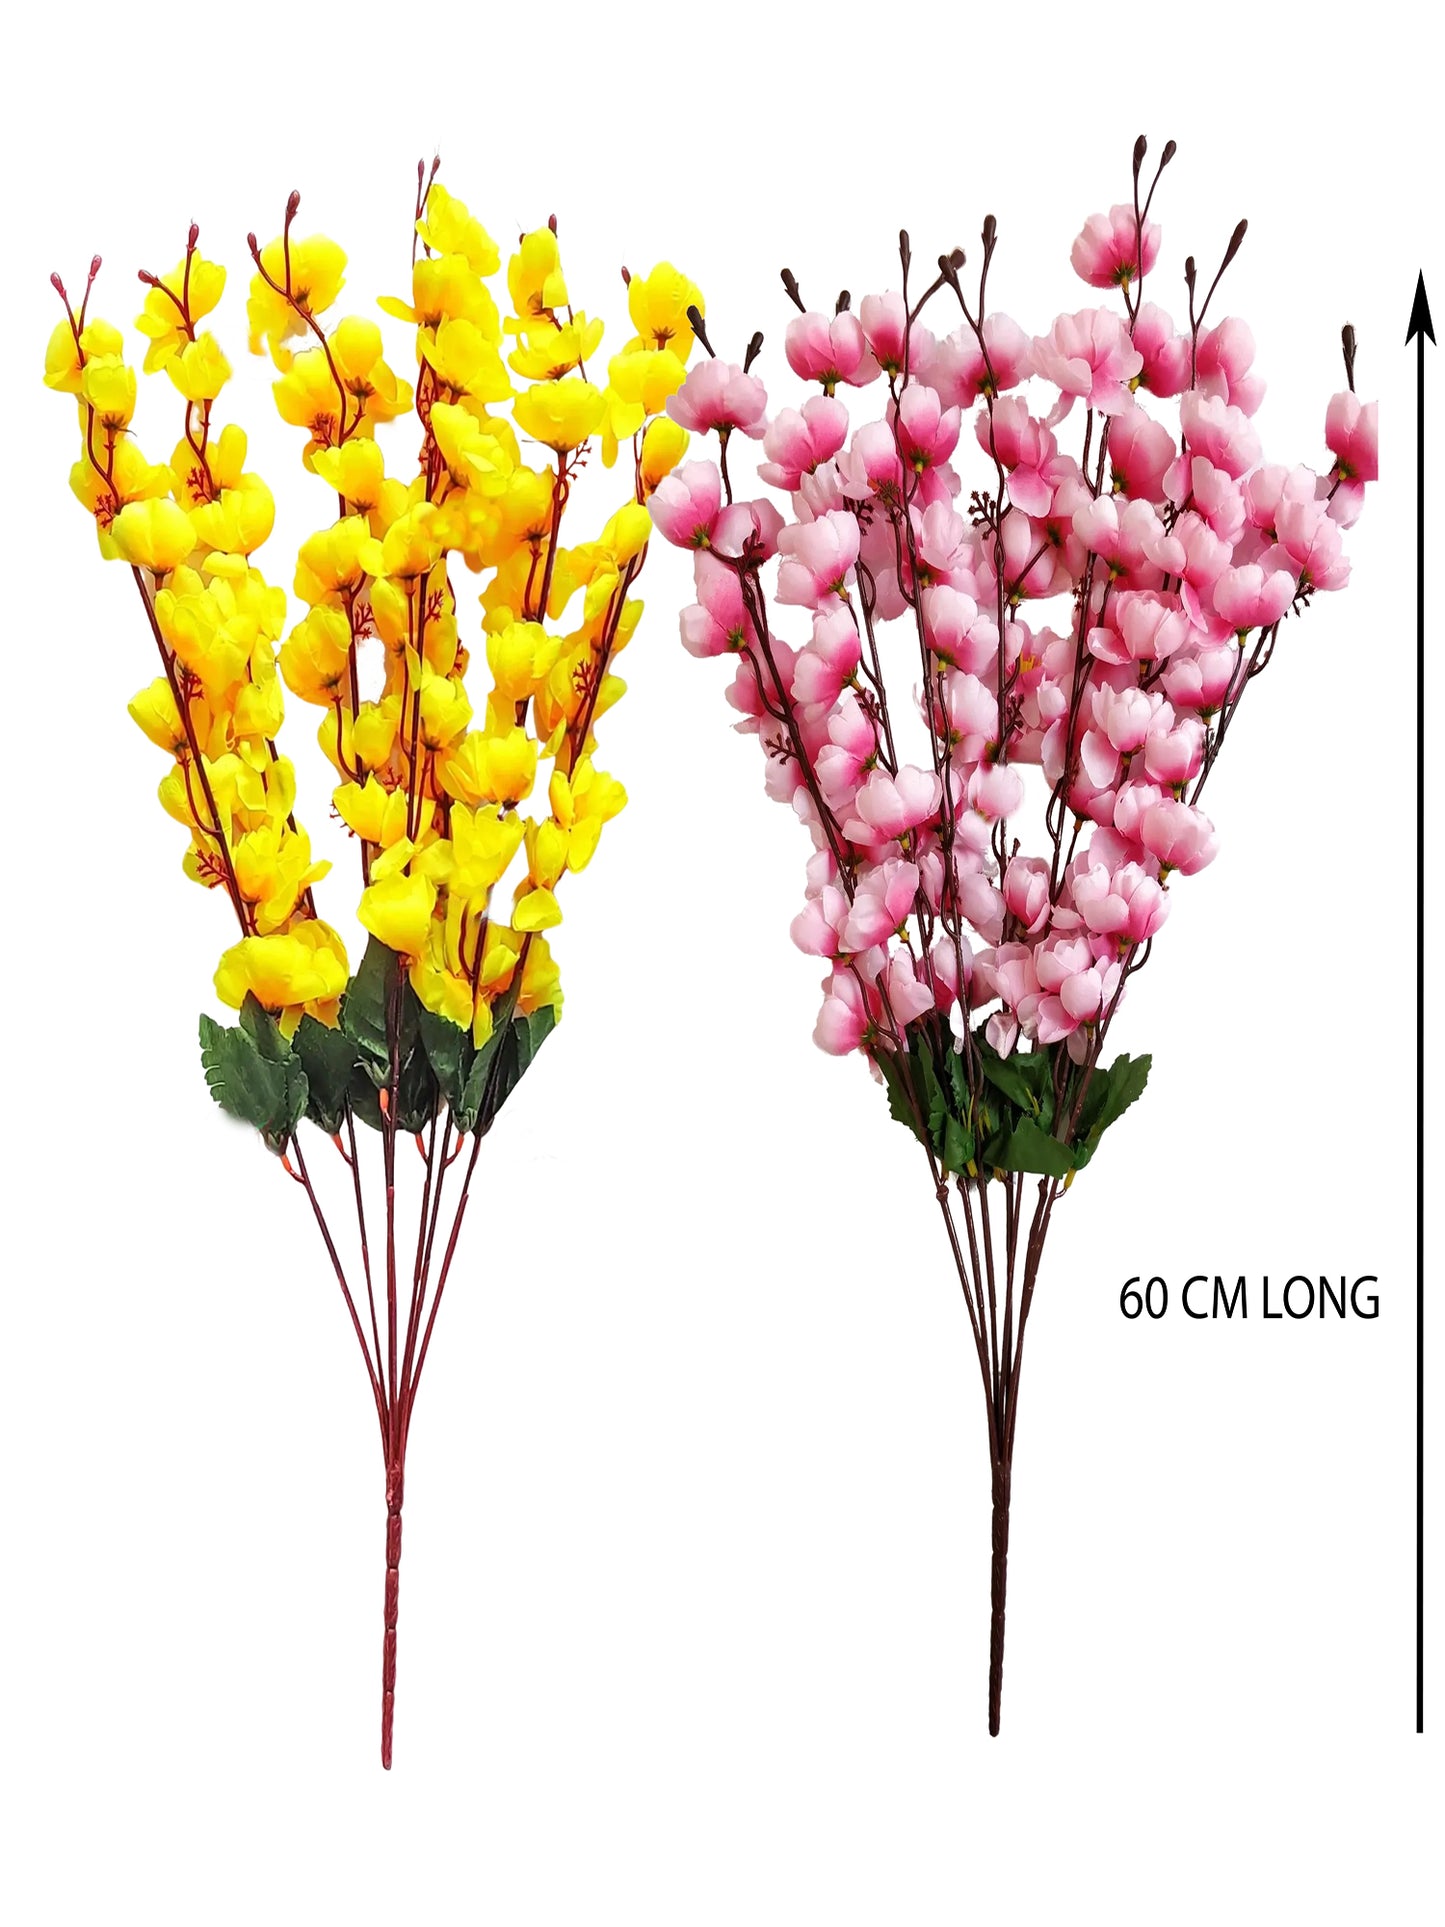 ARTSY® Artificial Flowers For Home Decoration Cherry Blossom Flower Bunch For Vase, Office Decor, Without VASE, Combo (Yellow light pink , Pack of 2 Pieces)